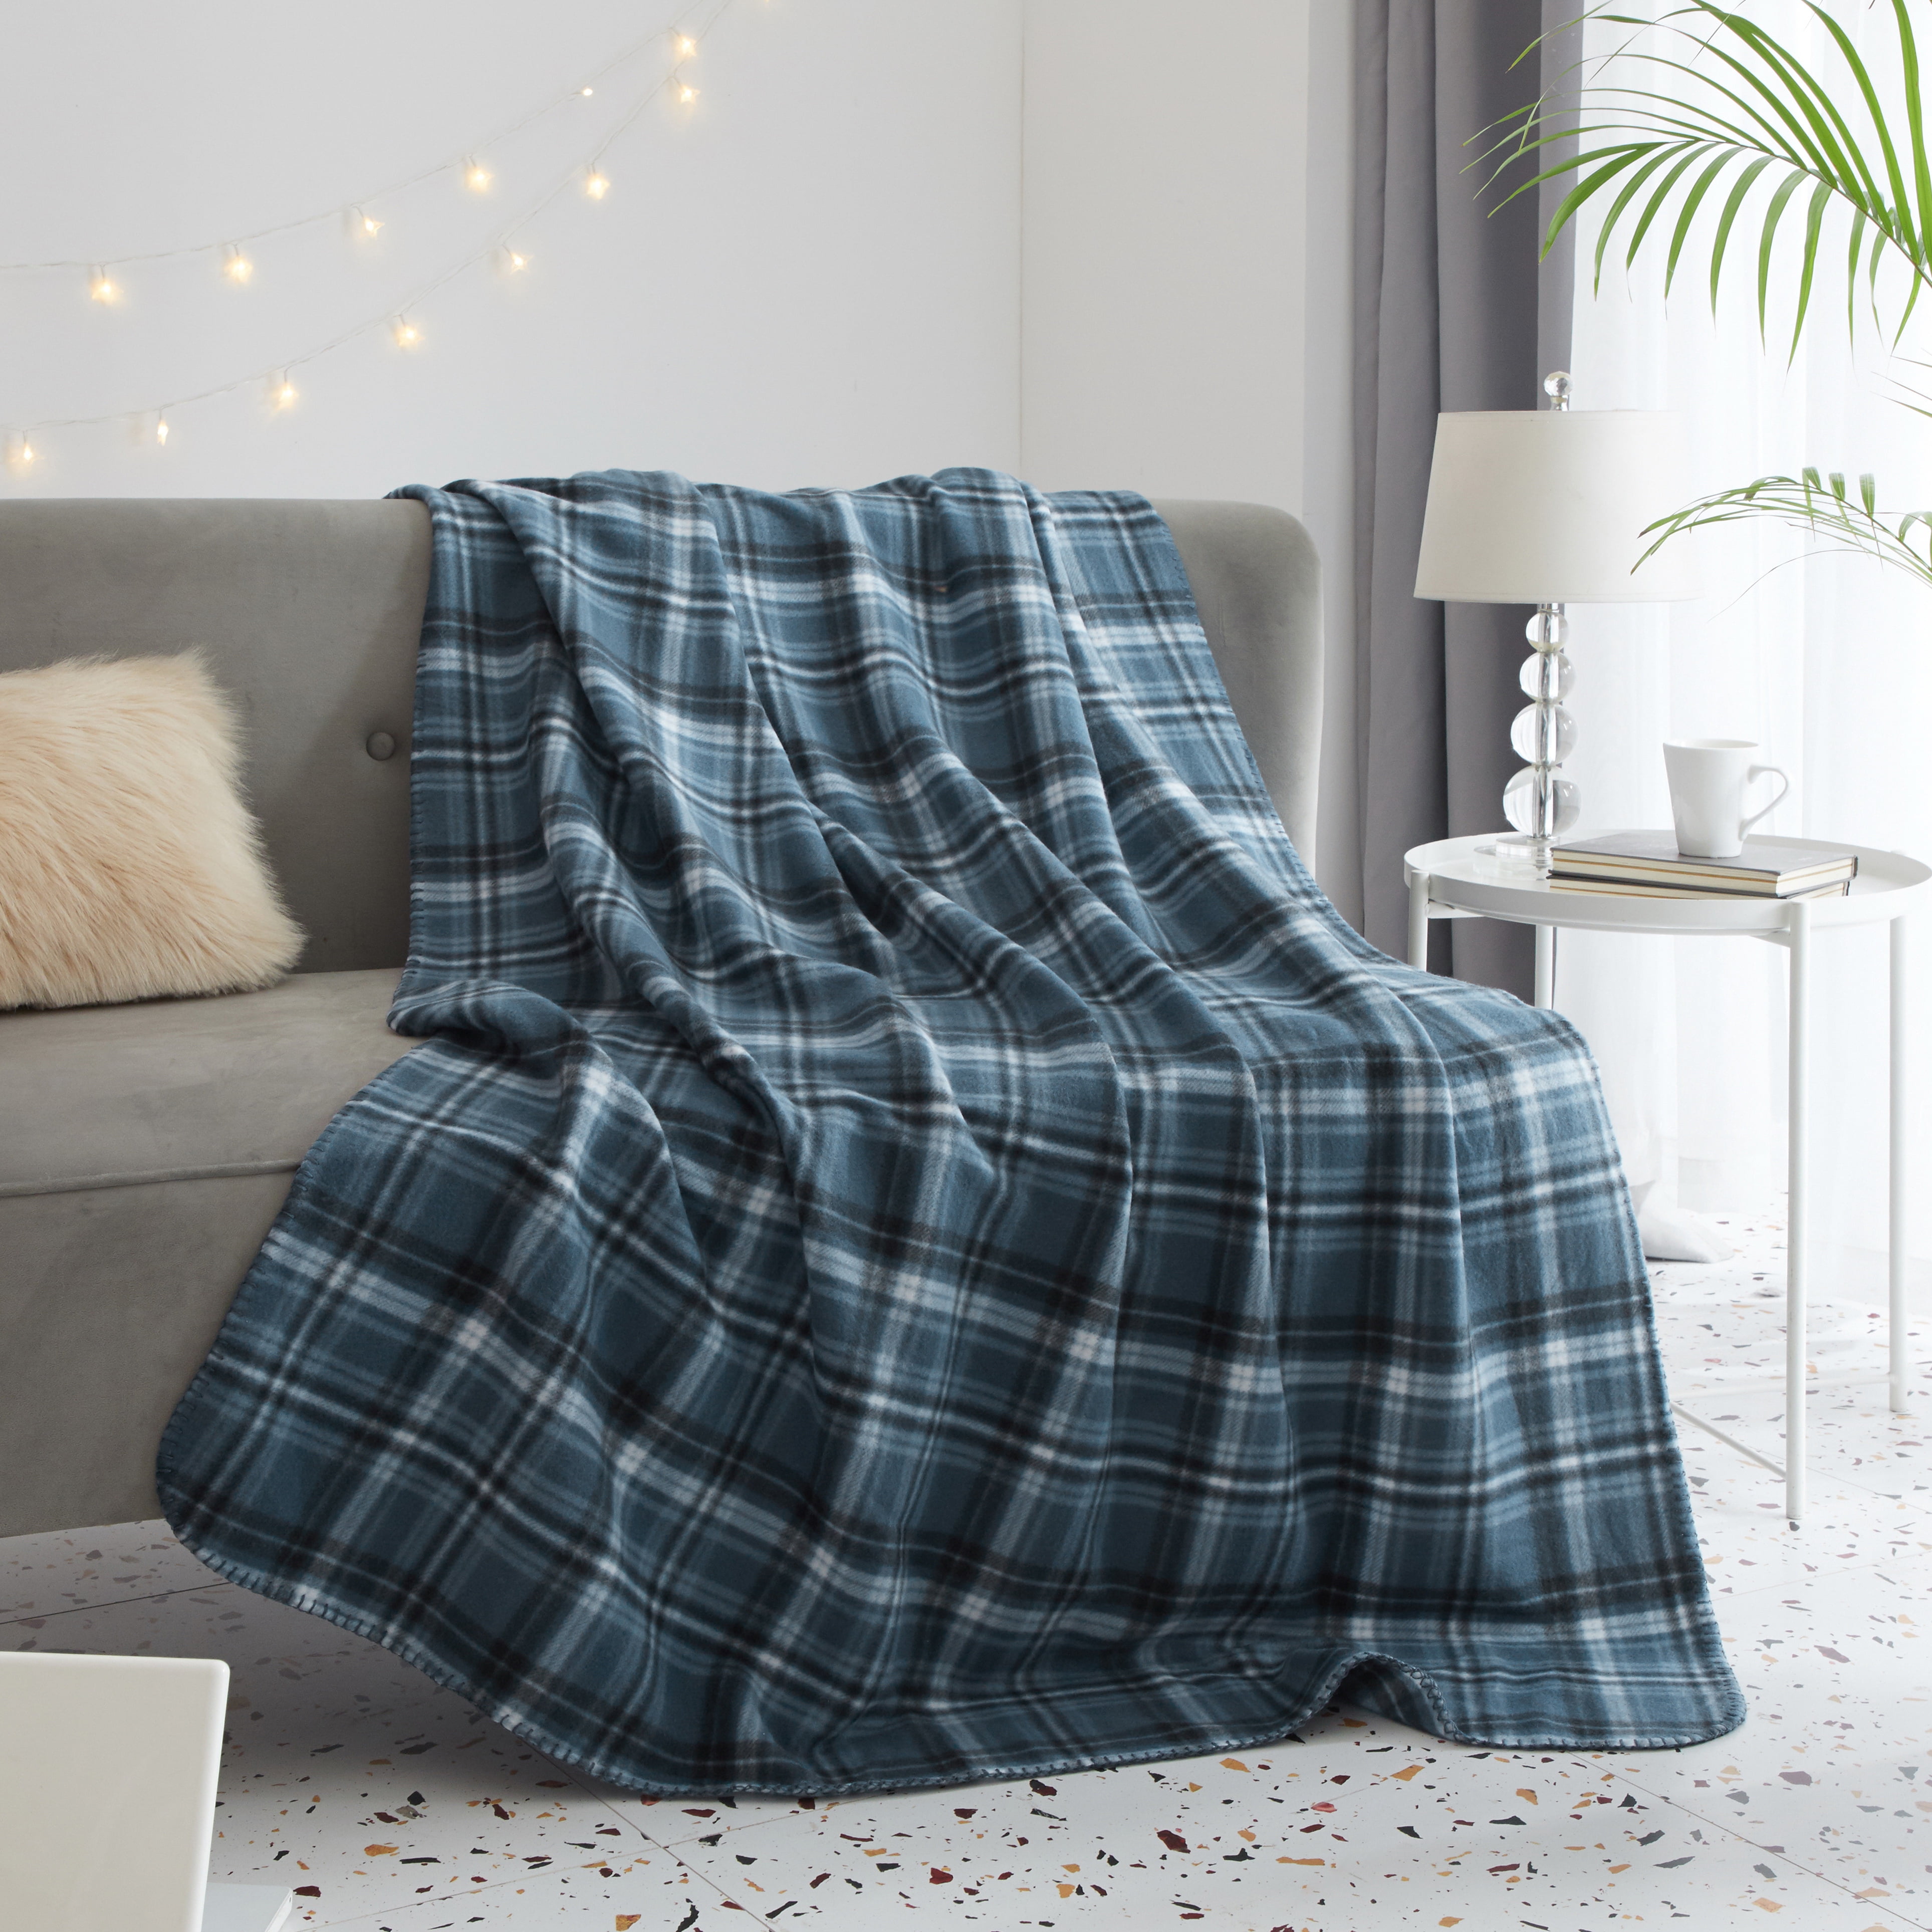 Throw Blanket 50”x60”,Lamb Wool Bed Blanket,Soft Plaid Fashion Style Blanket for Couch,Sofa,Camping